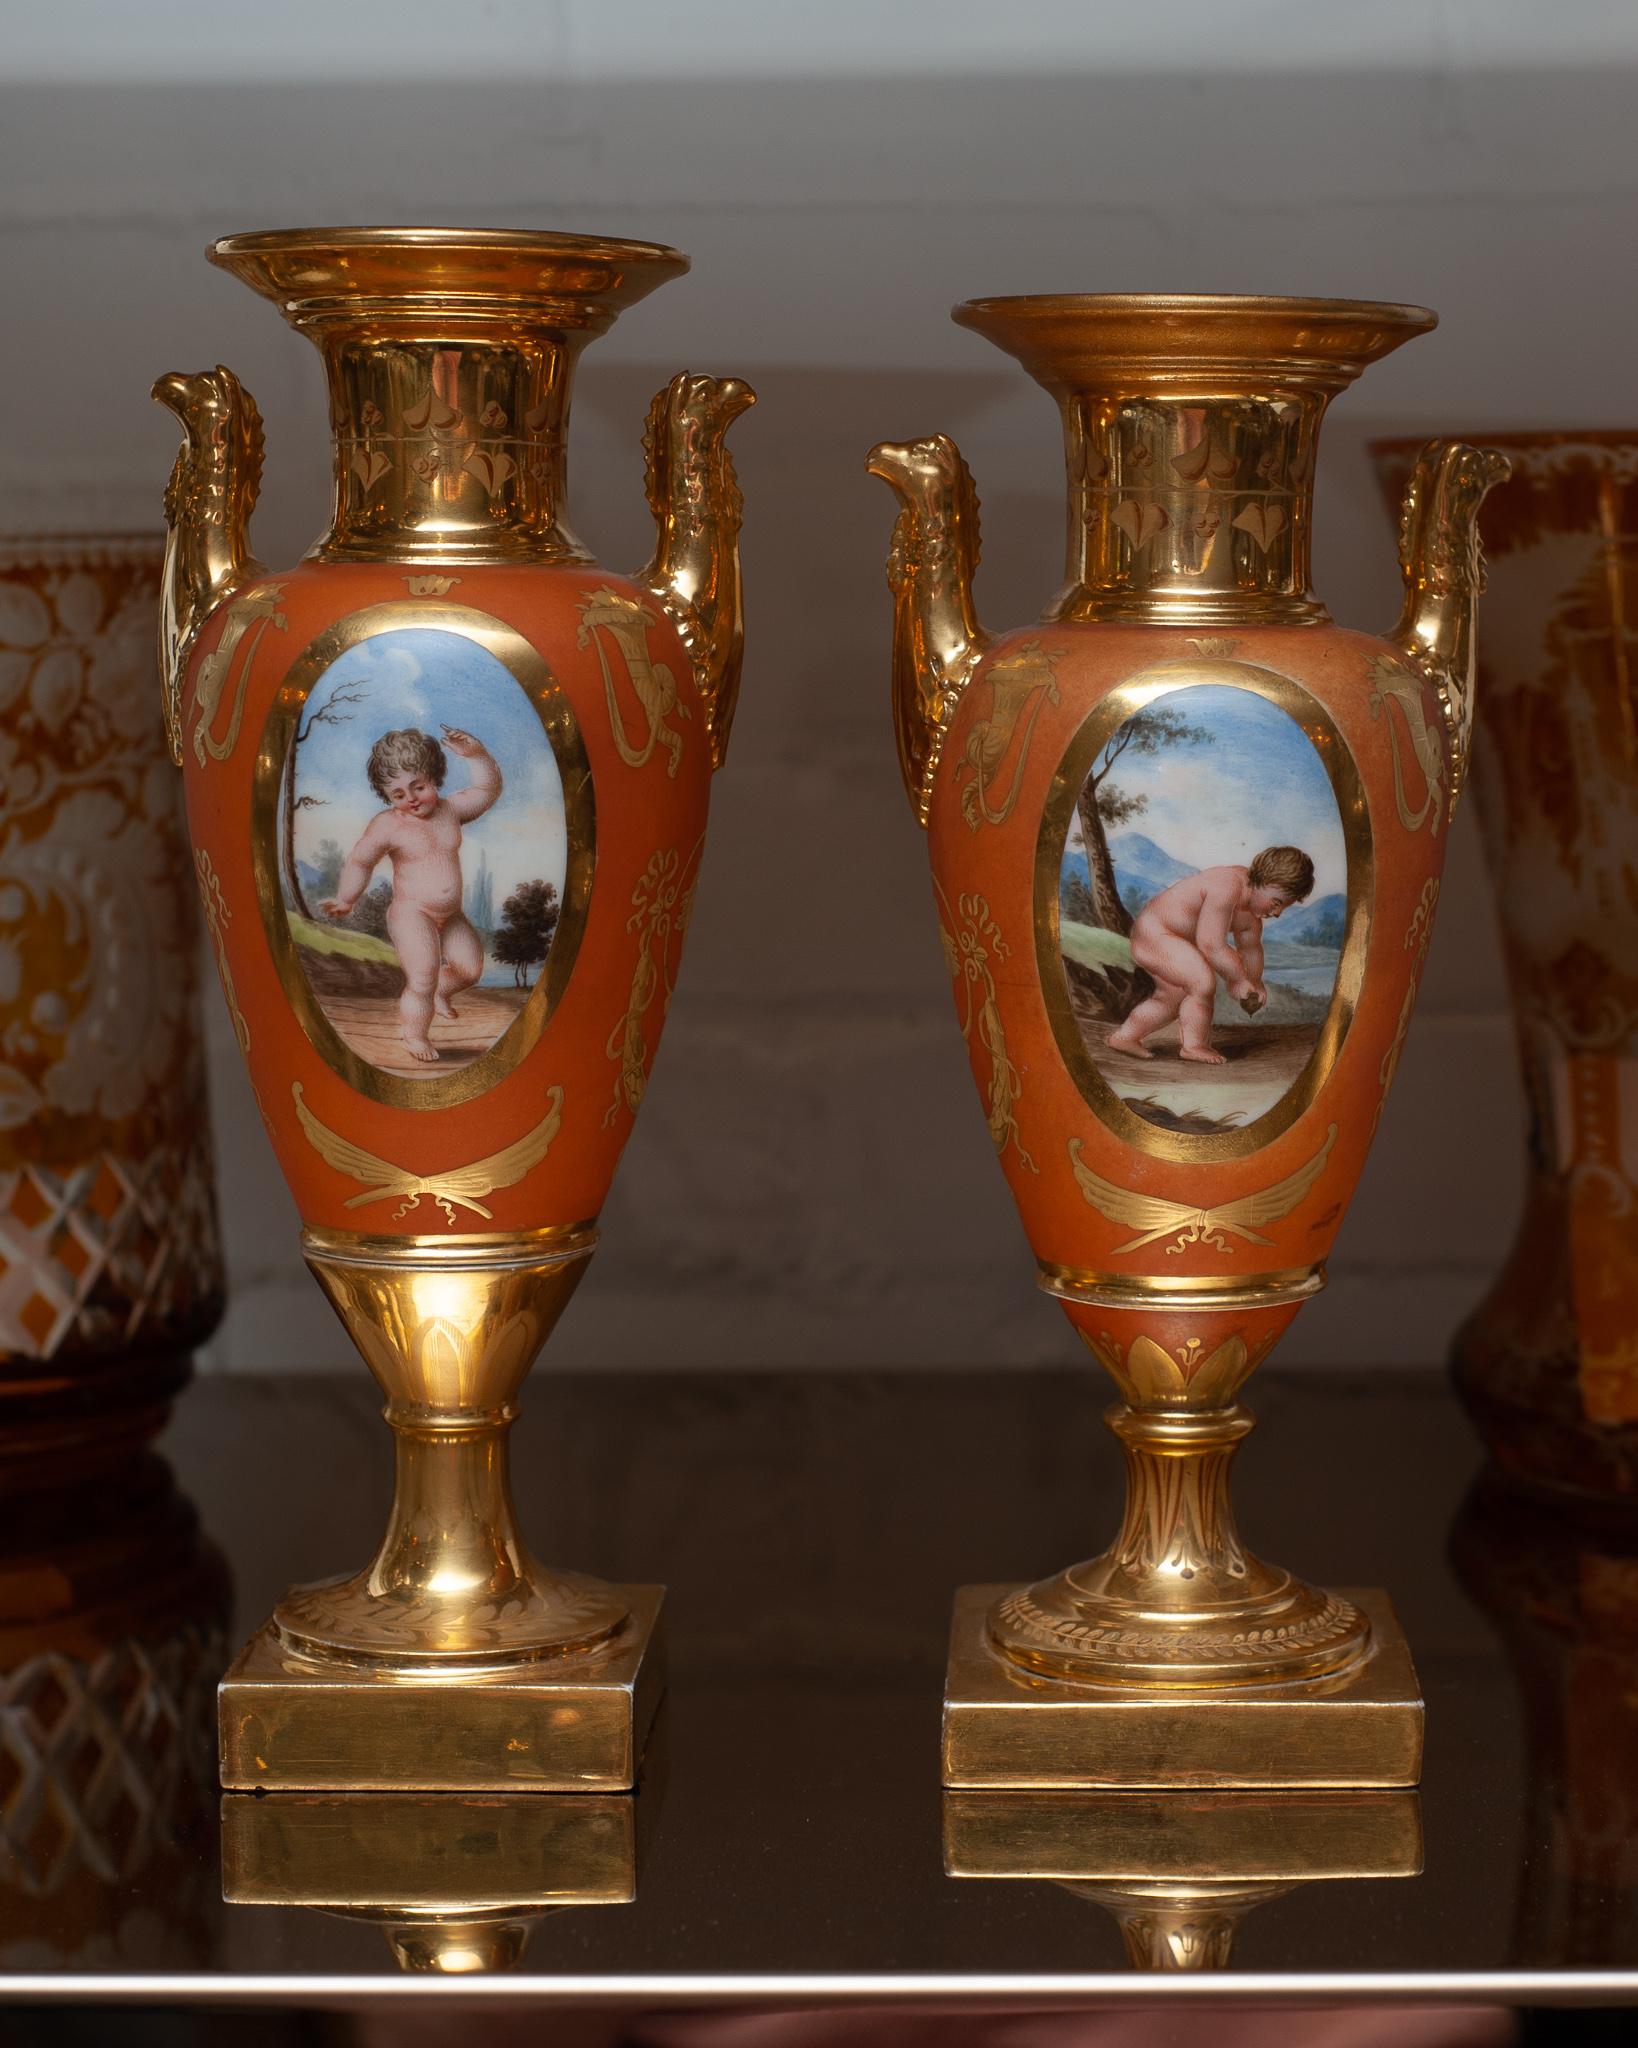 A beautiful pair of orange tone German hand painted urns, with gilded bases and detail. Each panel of either side of each urn depicts a unique painting. Gilded Griffin handles and pedestal bases.